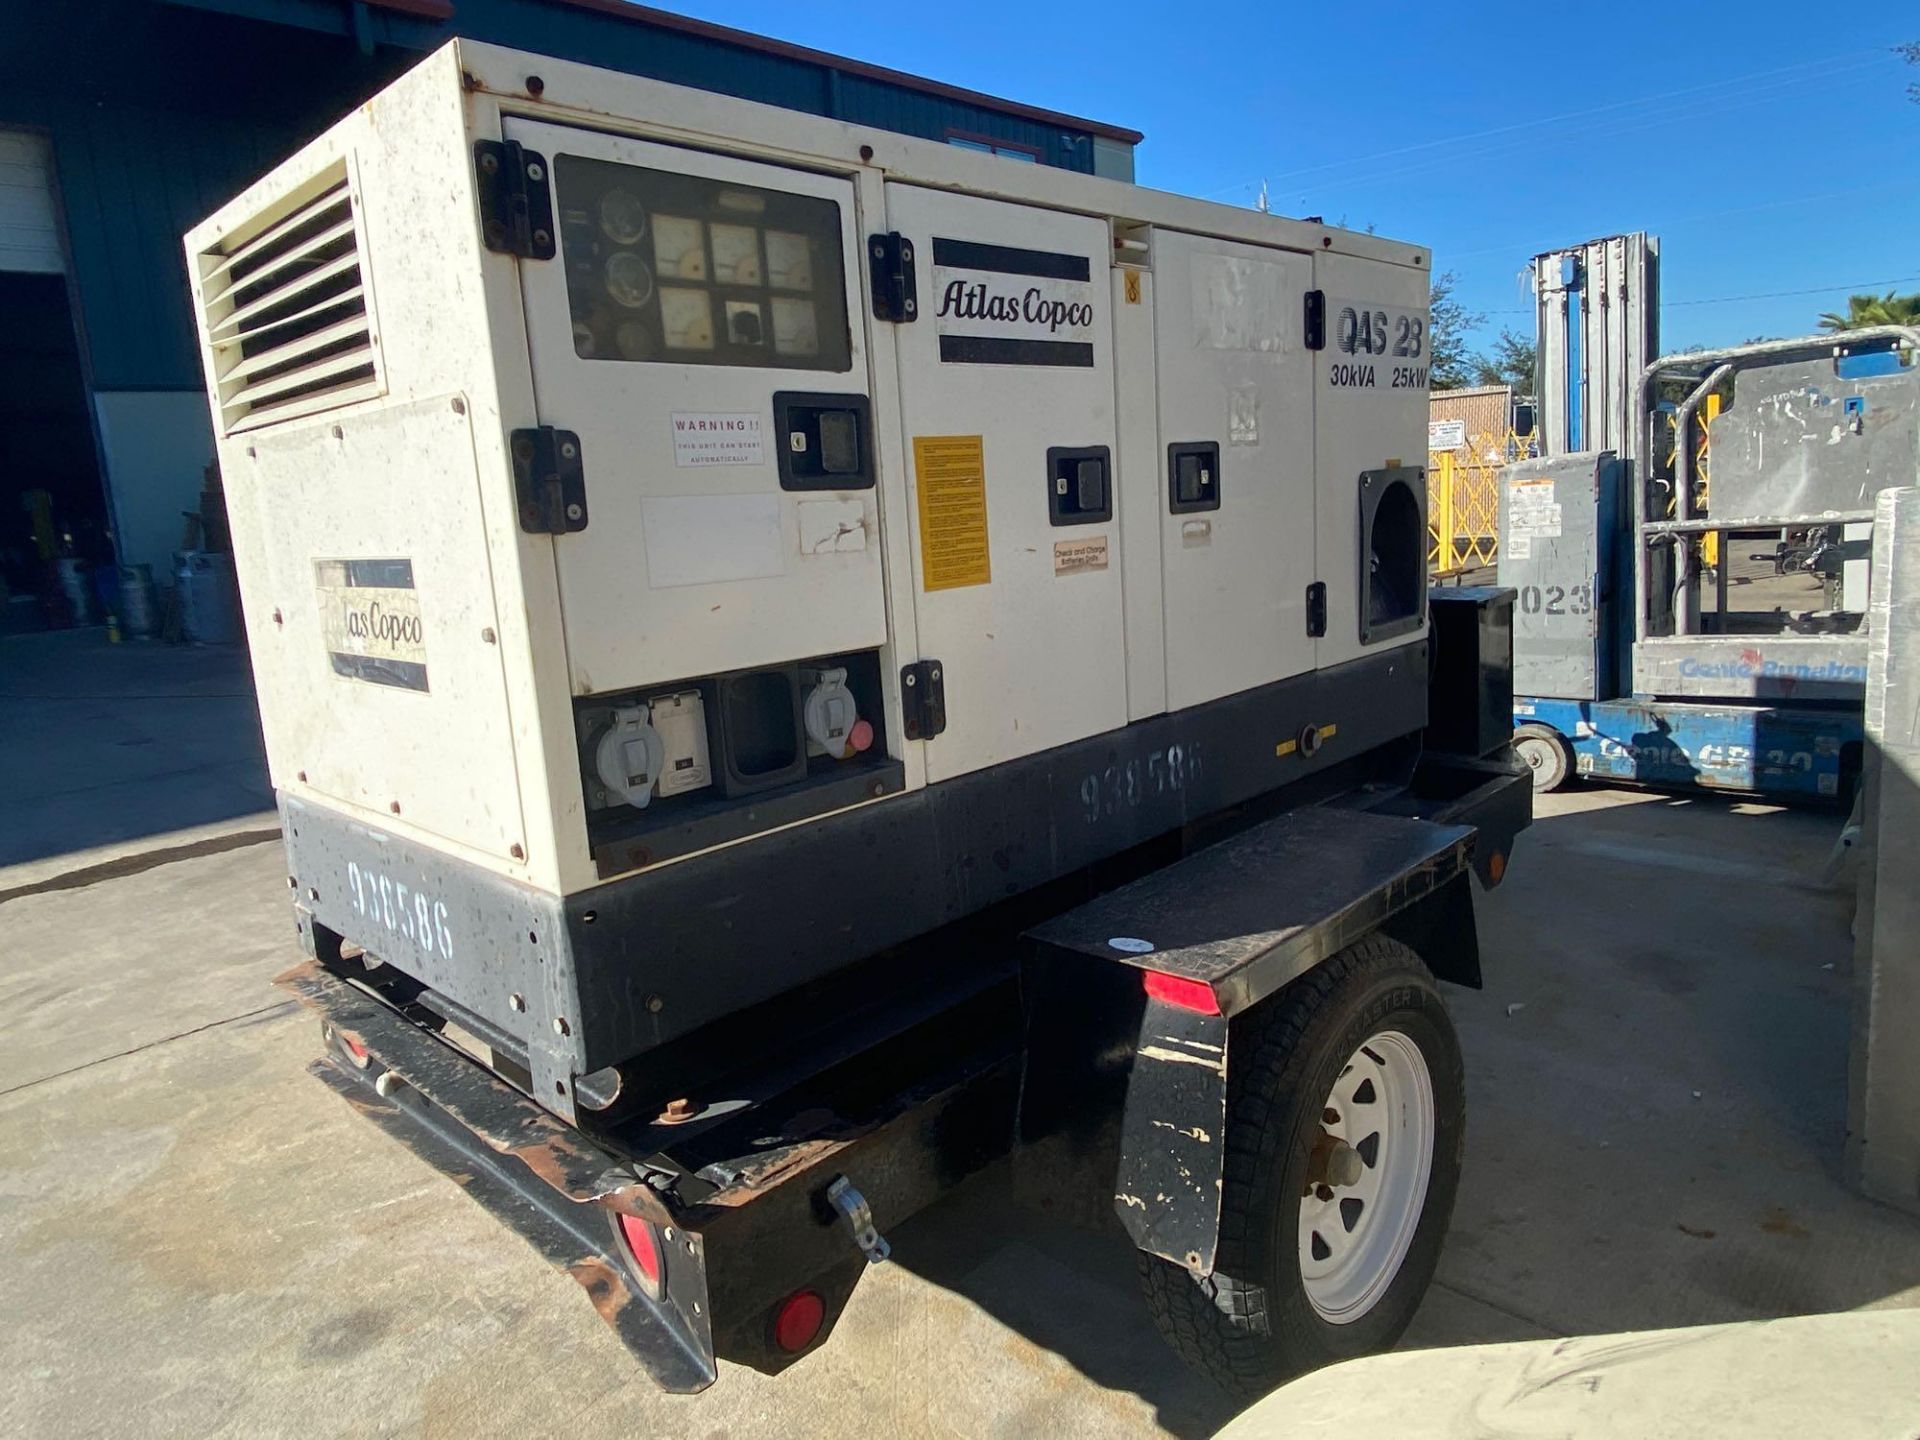 ATLAS COPCO G50 GENERATOR YANMAR DIESEL, TRAILER MOUNTED, 2041 HOURS SHOWING, RUNS AND OPERATES - Image 4 of 8